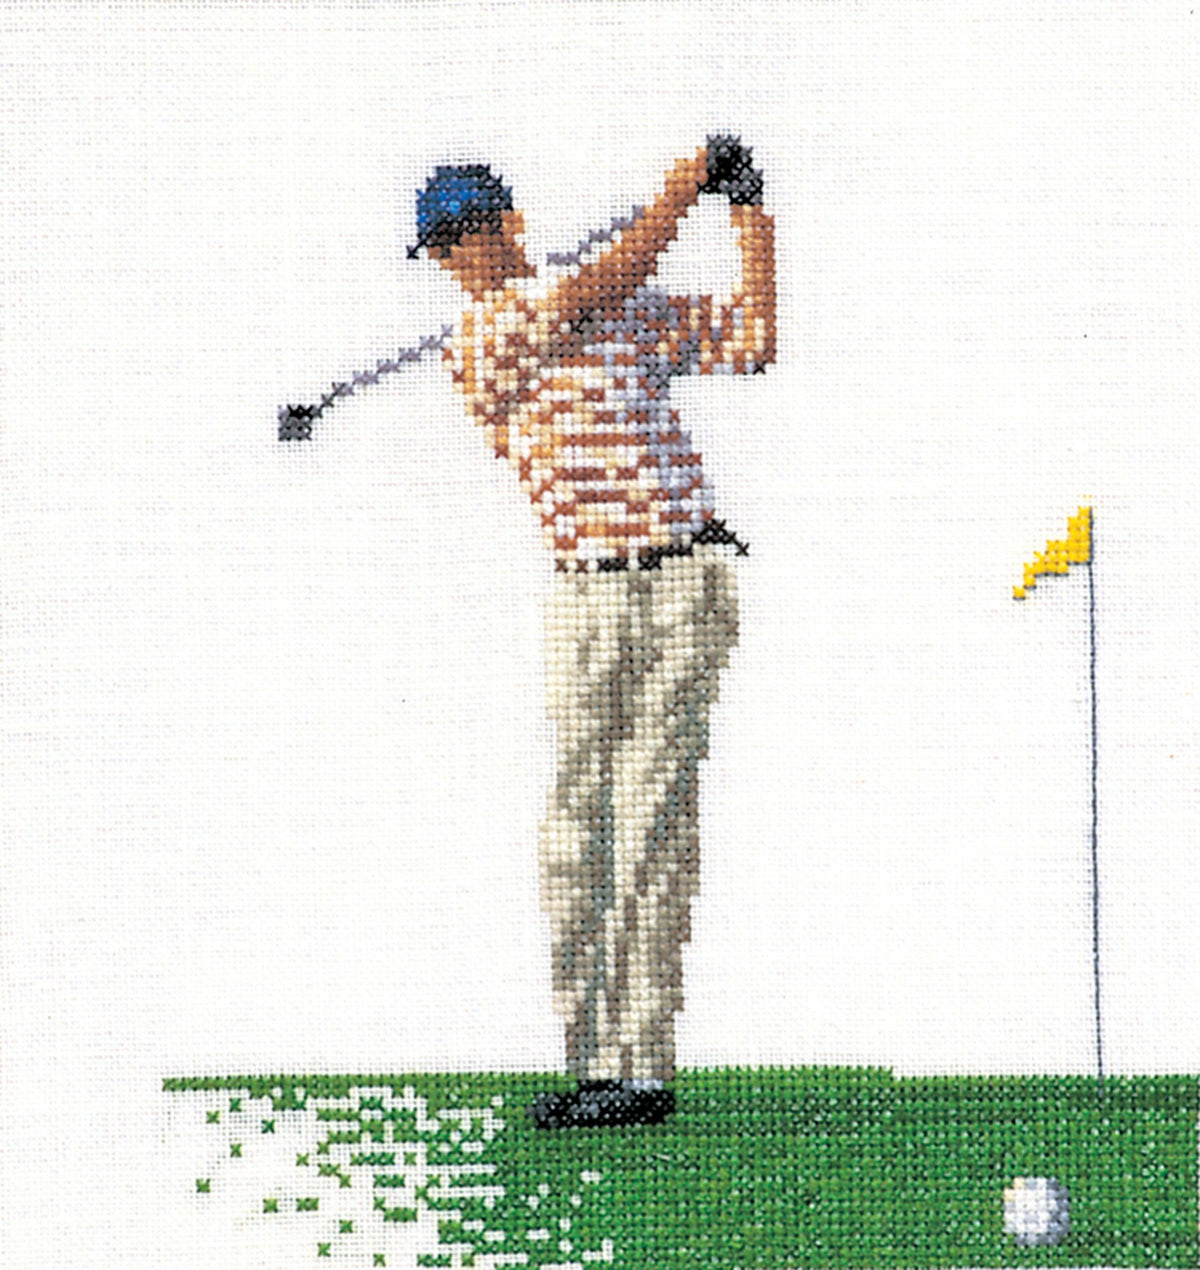 Thea Gouverneur - Counted Cross Stitch Kit - Golf - Aida - 18 count - 3032A - Thea Gouverneur Since 1959